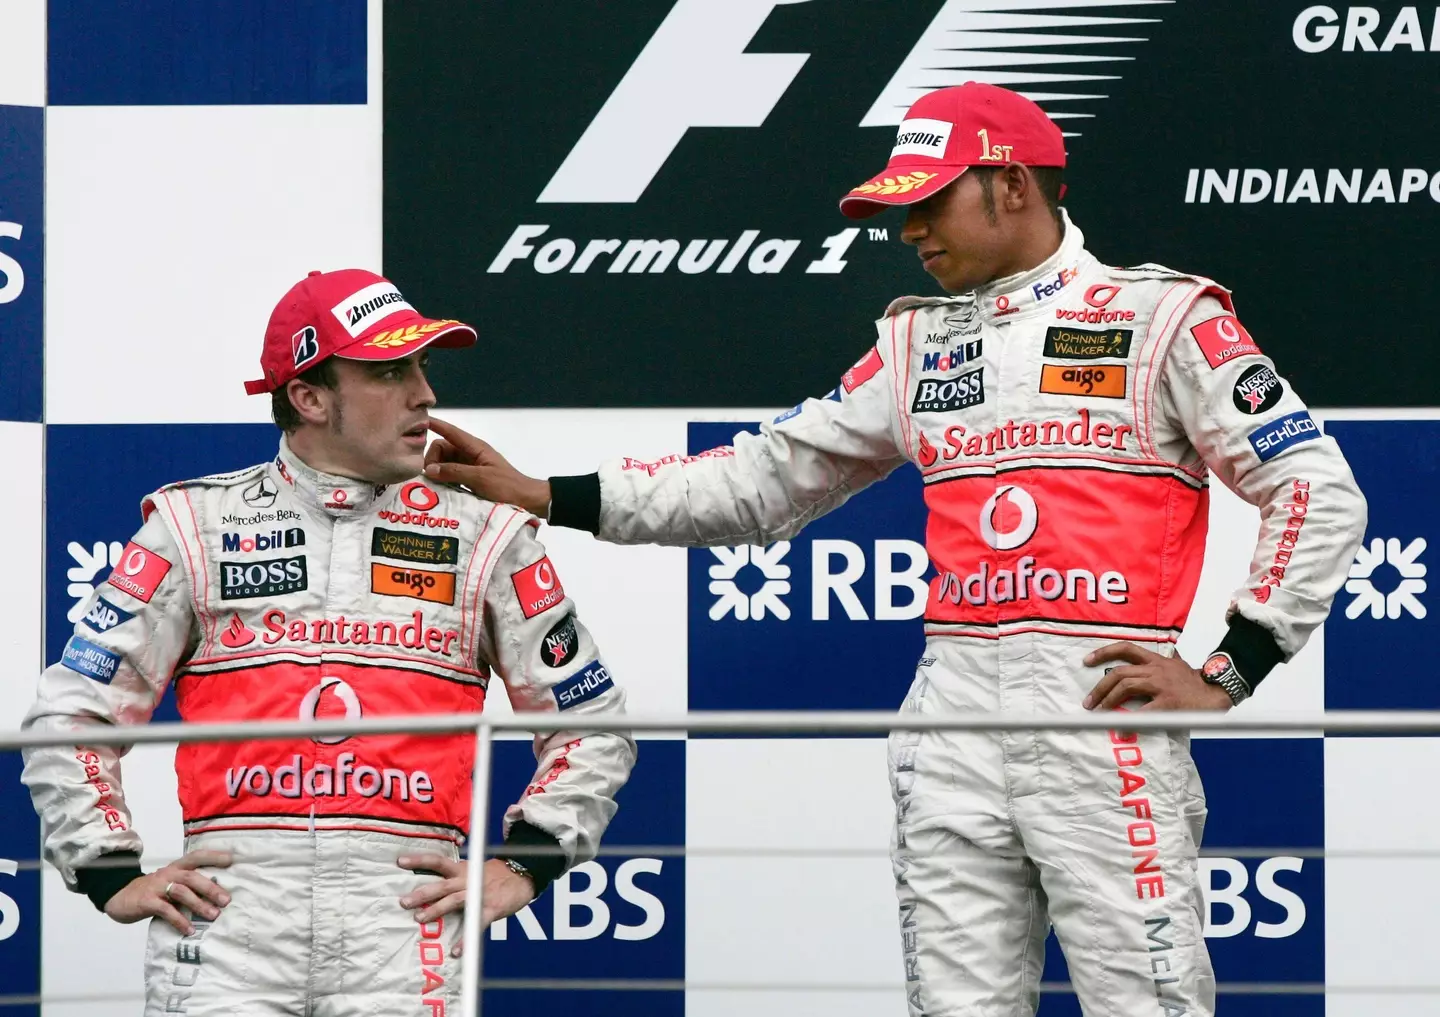 Hamilton and Alonso did not get on well when they were teammates. Image: Alamy